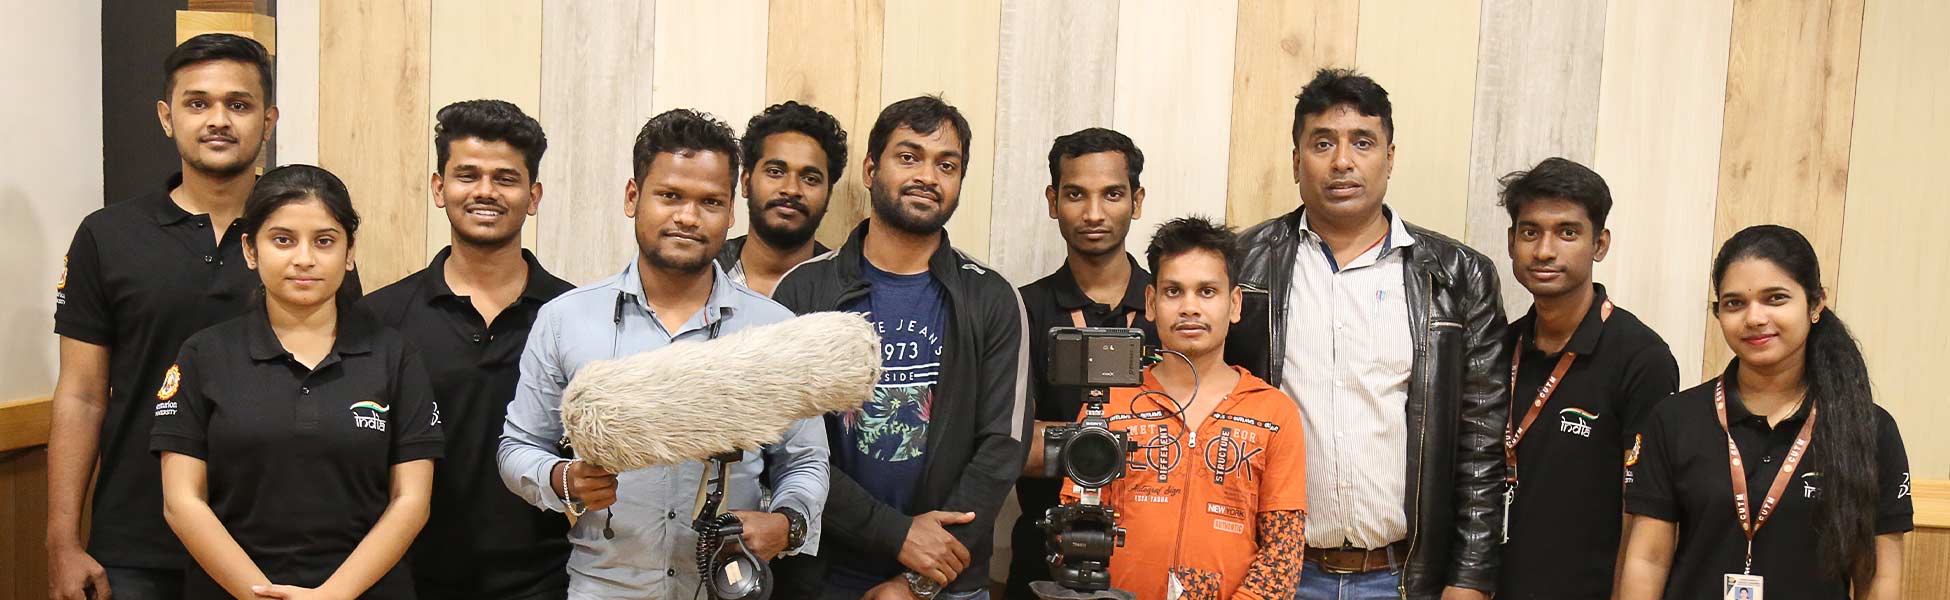 tvc shooting locations in india, tvc shooting locations in maharashtra, tvc shooting locations in pune, tv commercial shooting locations in india, tv commercial shooting locations in maharashtra, tv commercial shooting locations in pune